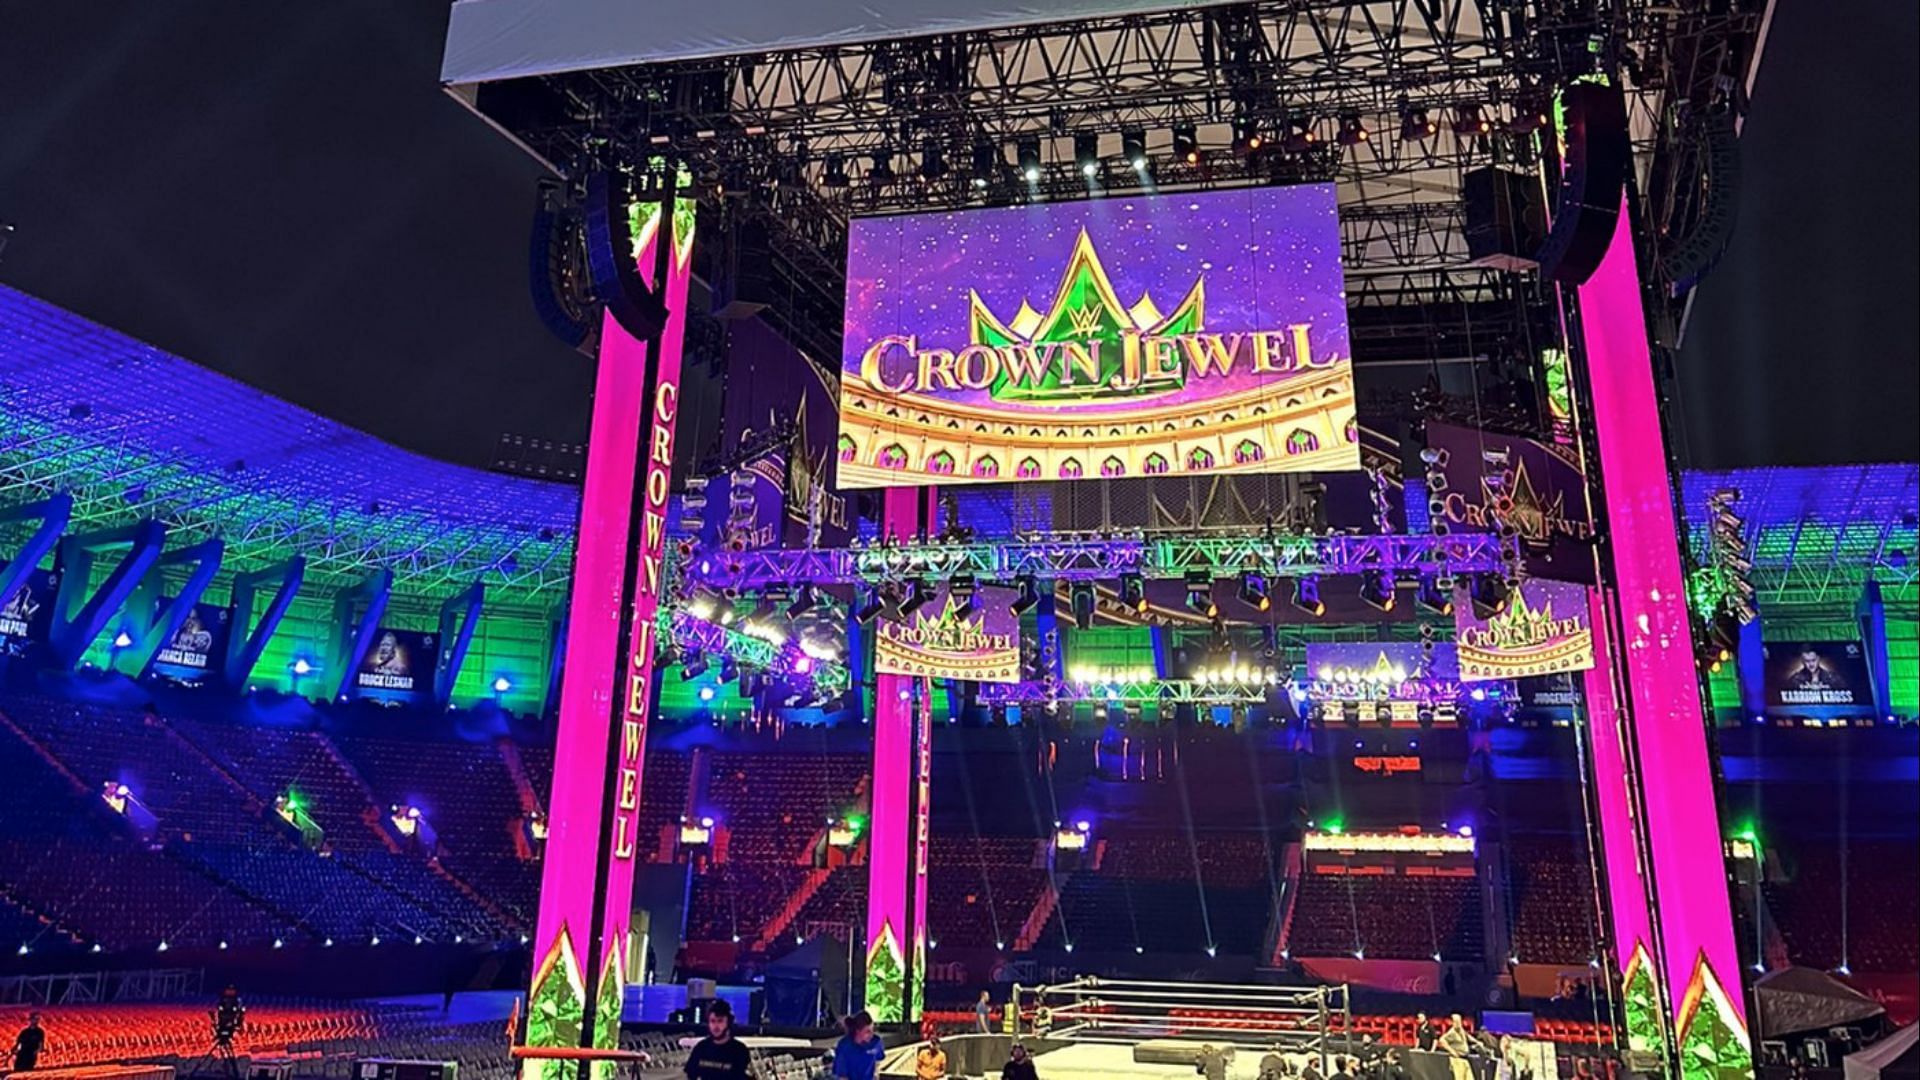 WWE Crown Jewel saw some major players making moves